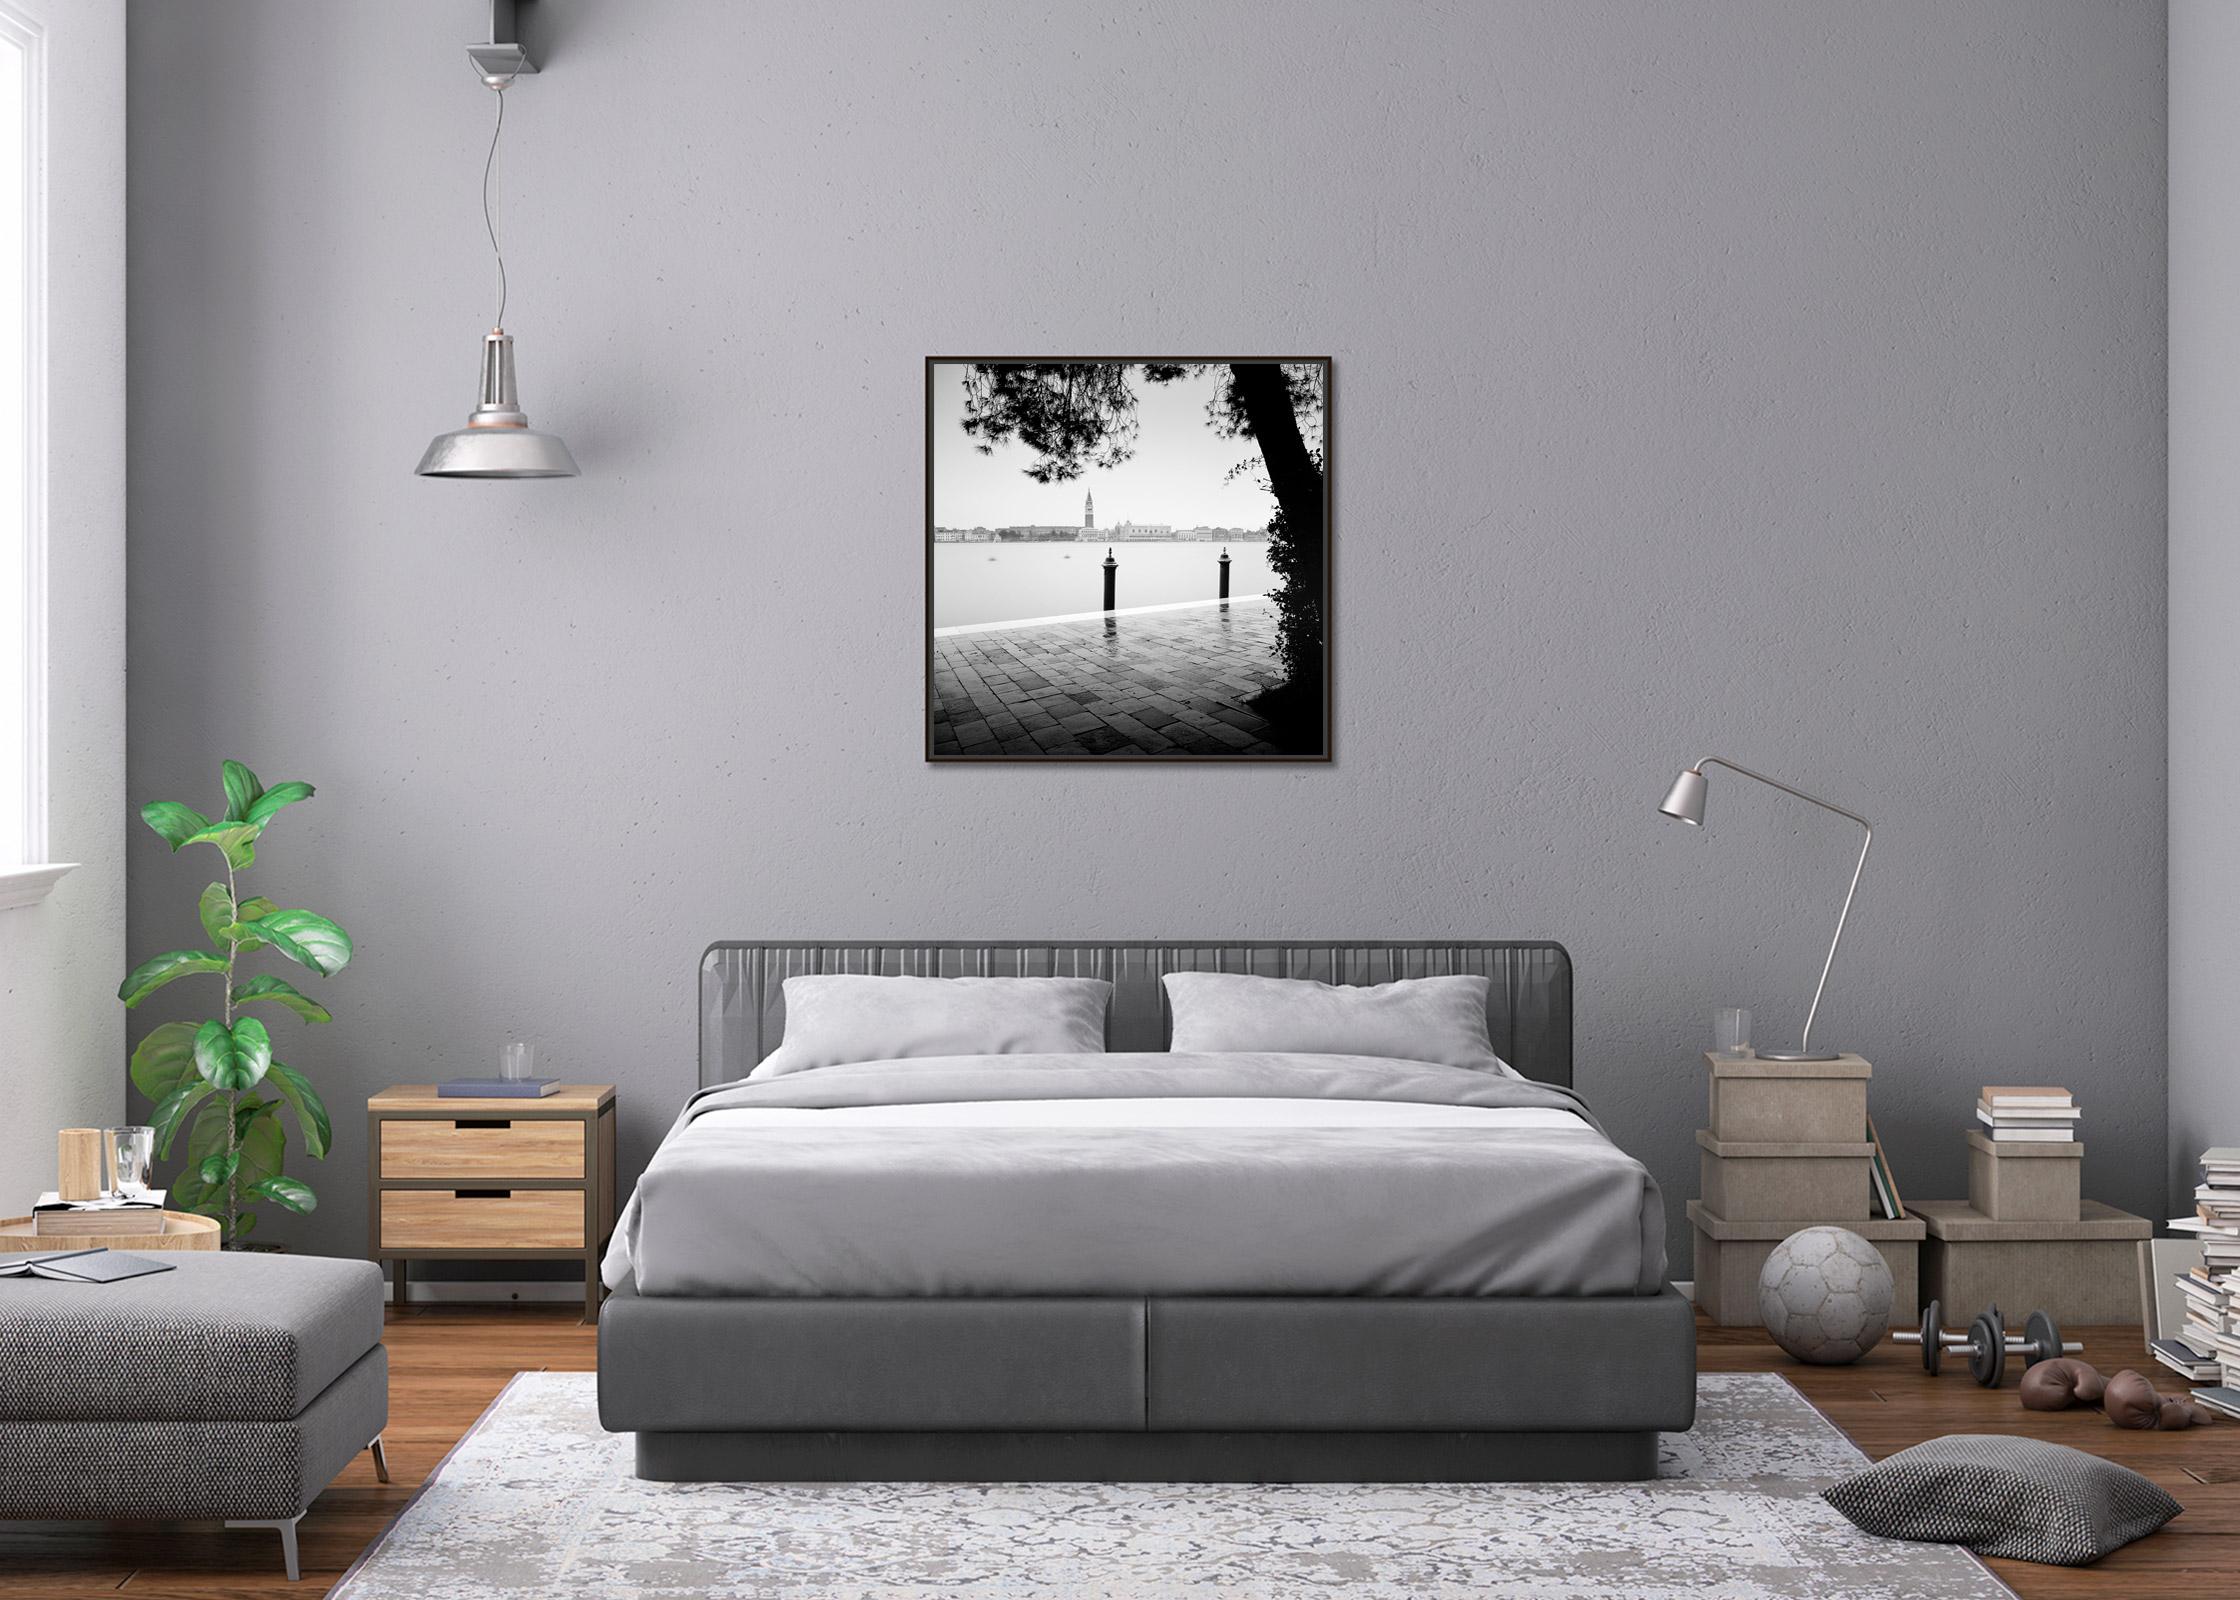 Black and white fine art long exposure cityscape - waterscape photography. Archival pigment ink print as part of a limited edition of 9. All Gerald Berghammer prints are made to order in limited editions on Hahnemuehle Photo Rag Baryta. Each print